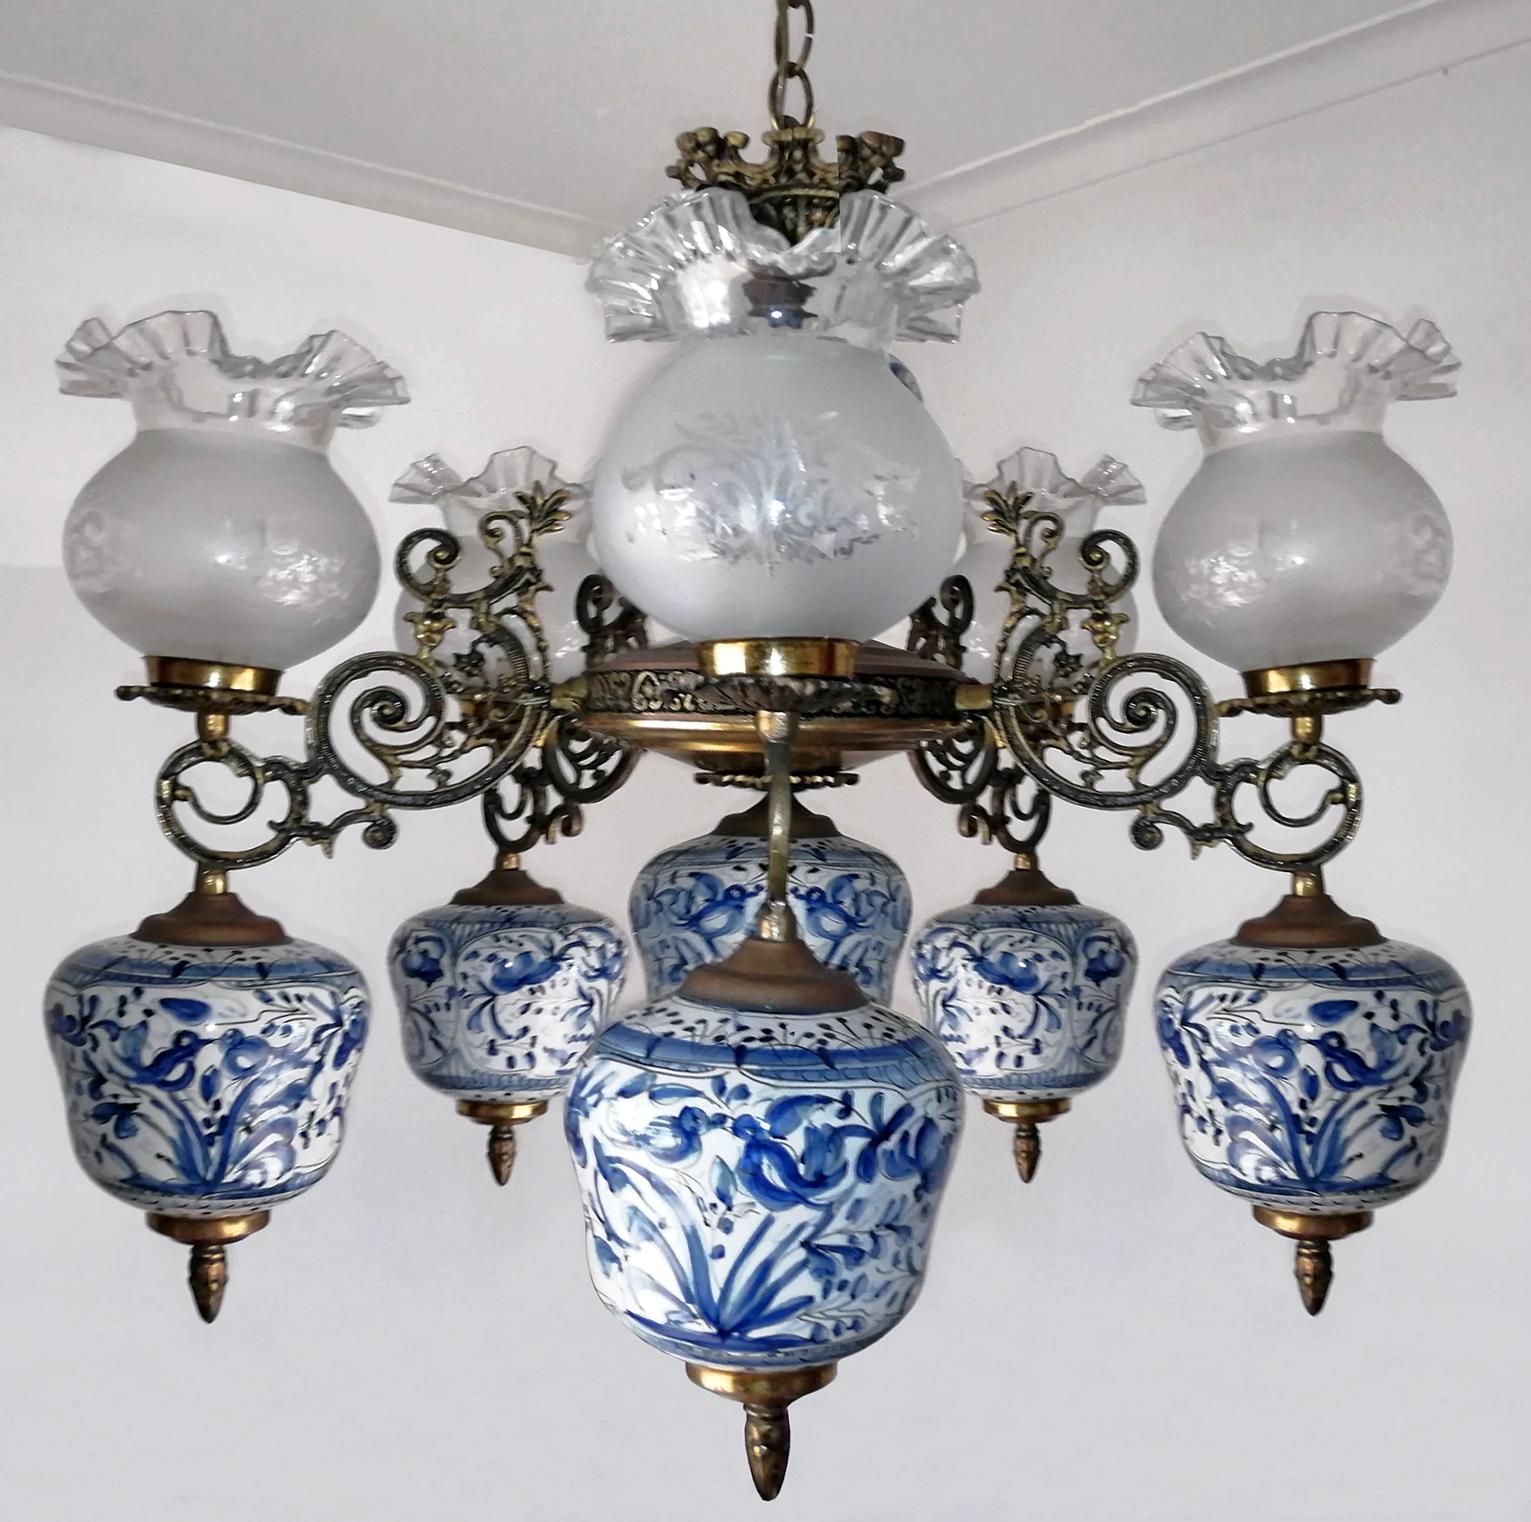 Art Deco delft blue oil lamp hand painted chandelier in the 17th century style.
Measures:
Width 27.56 in / 70 cm
Height 80.70 in (Chain 19.68 in)/ 105 cm (Chain 50 cm)
5-light bulbs E 14 / good working condition
Assembly required. Bulbs not